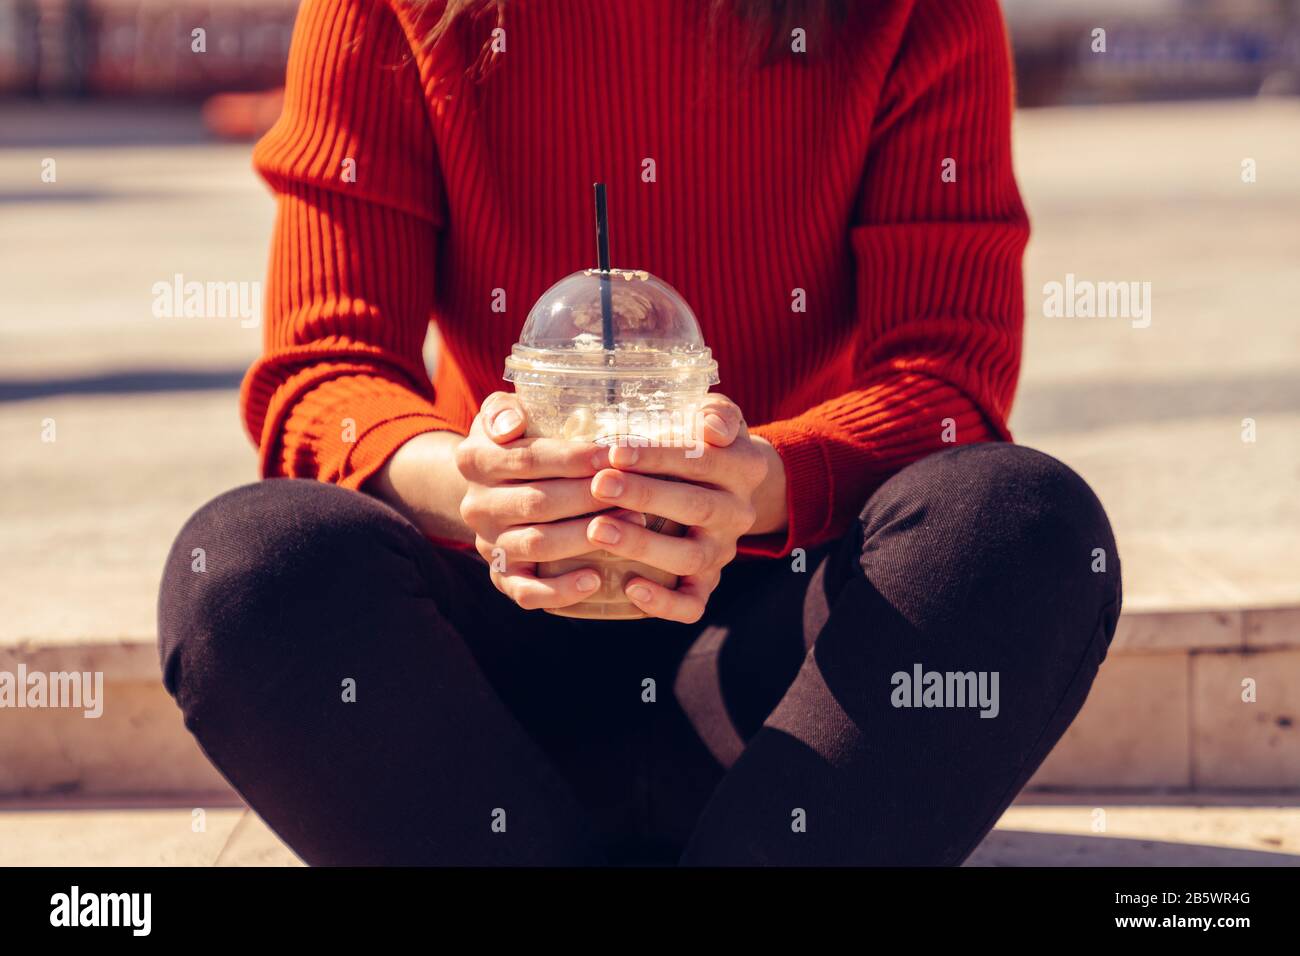 Woman is sitting and holding a disposal cup of a delicious frappe Stock Photo